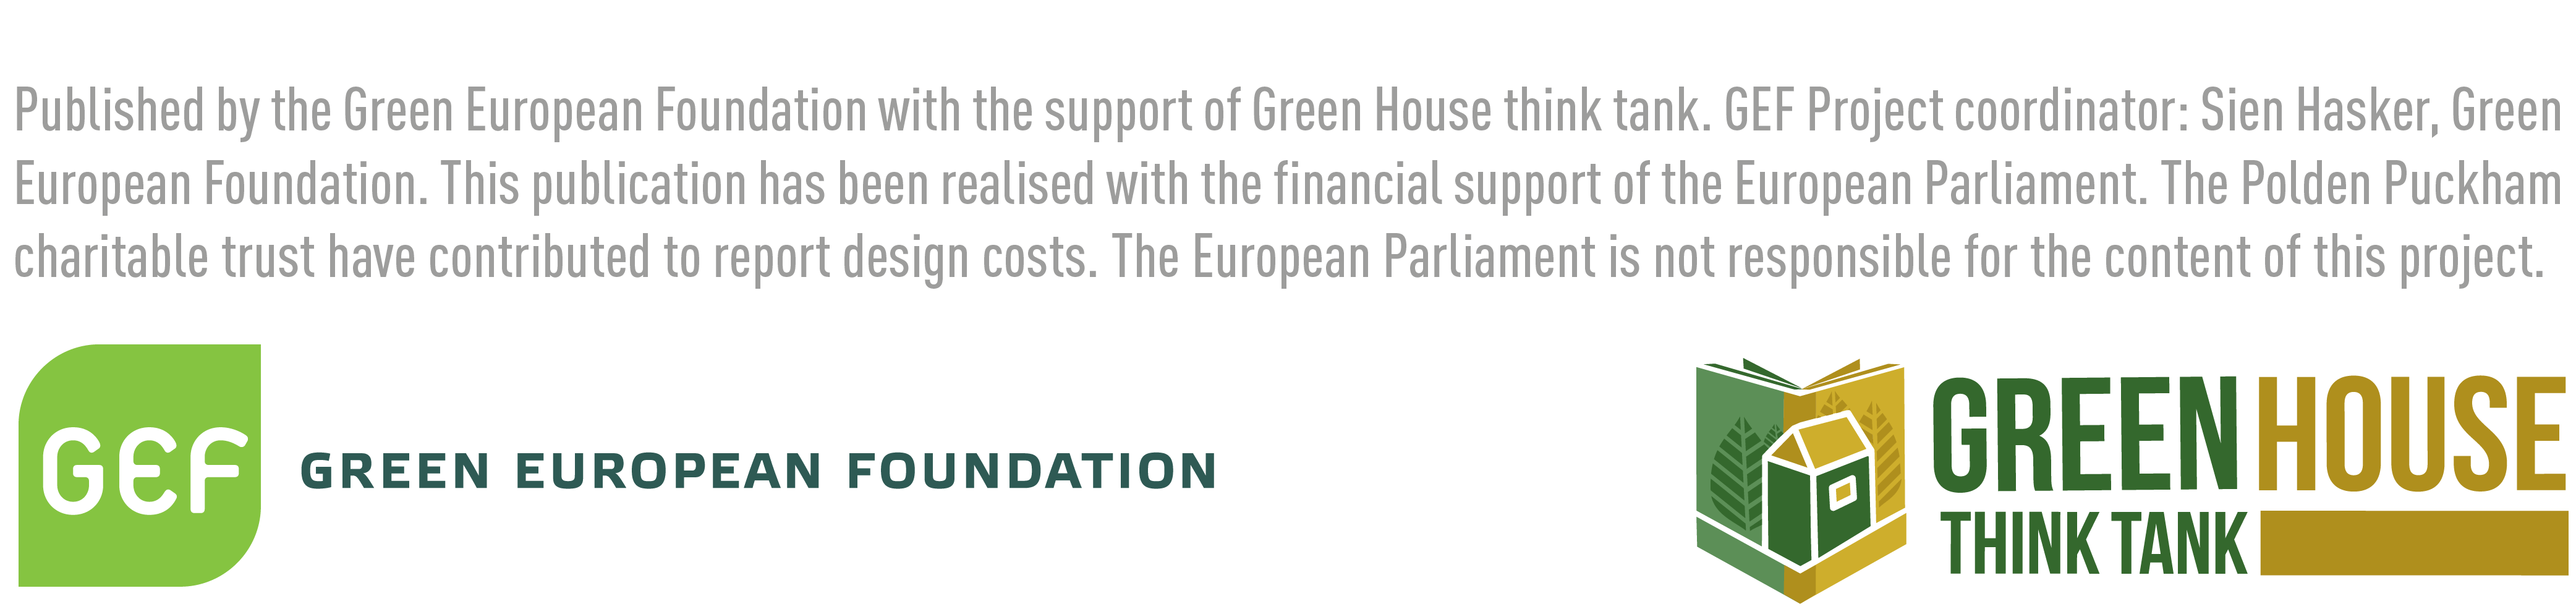 Images of the logos of the Green European Foundation and Green House think tank with text that reads Canada Room/Main Lanyon Building, Queen's University, Belfast BT7 1NN